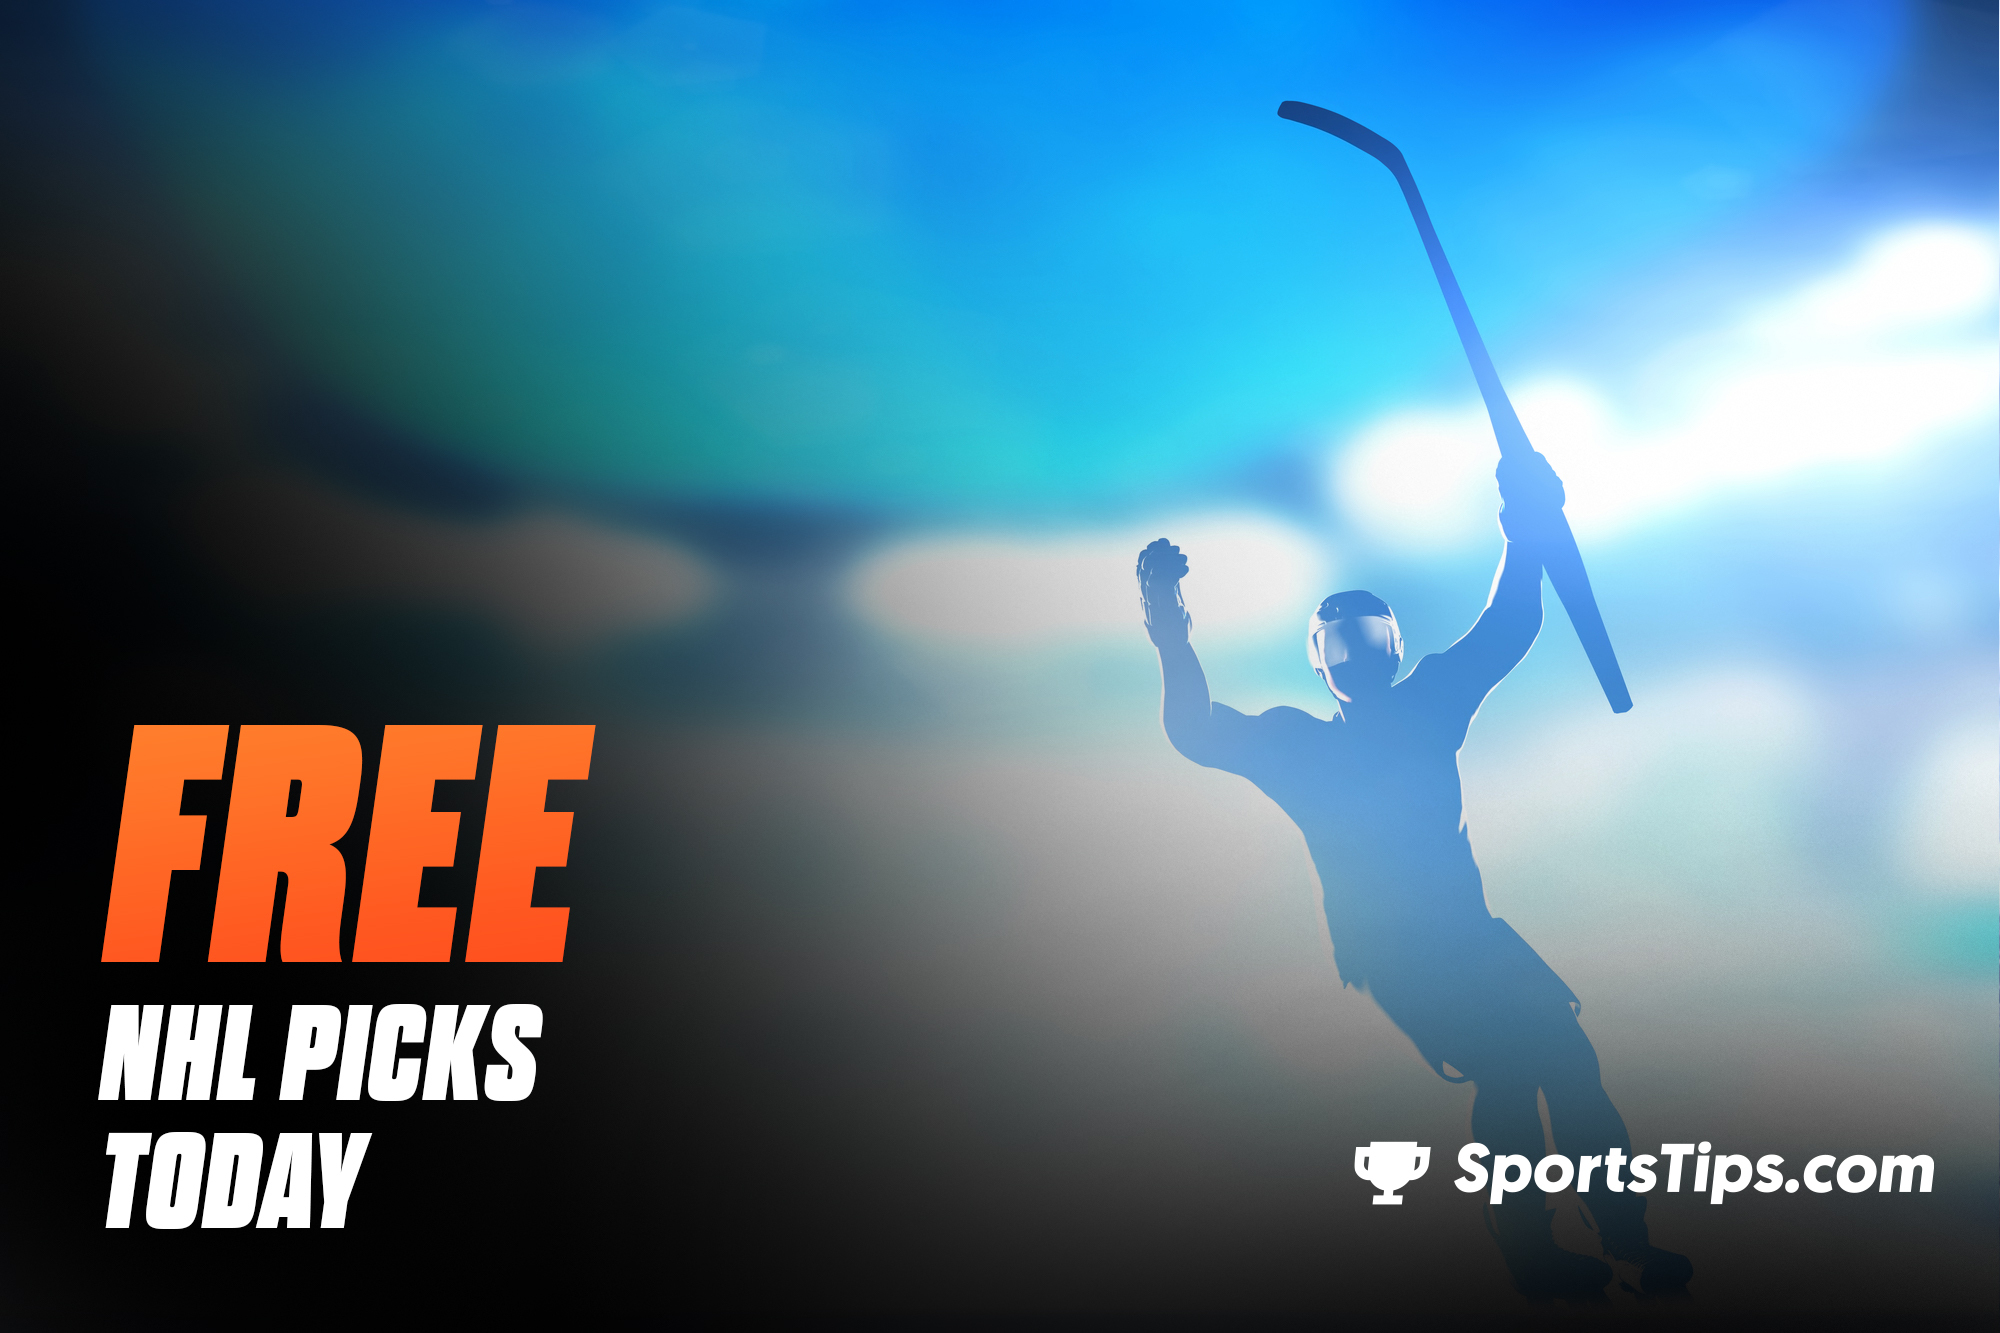 Free NHL Picks Today for Saturday, March 13th, 2021